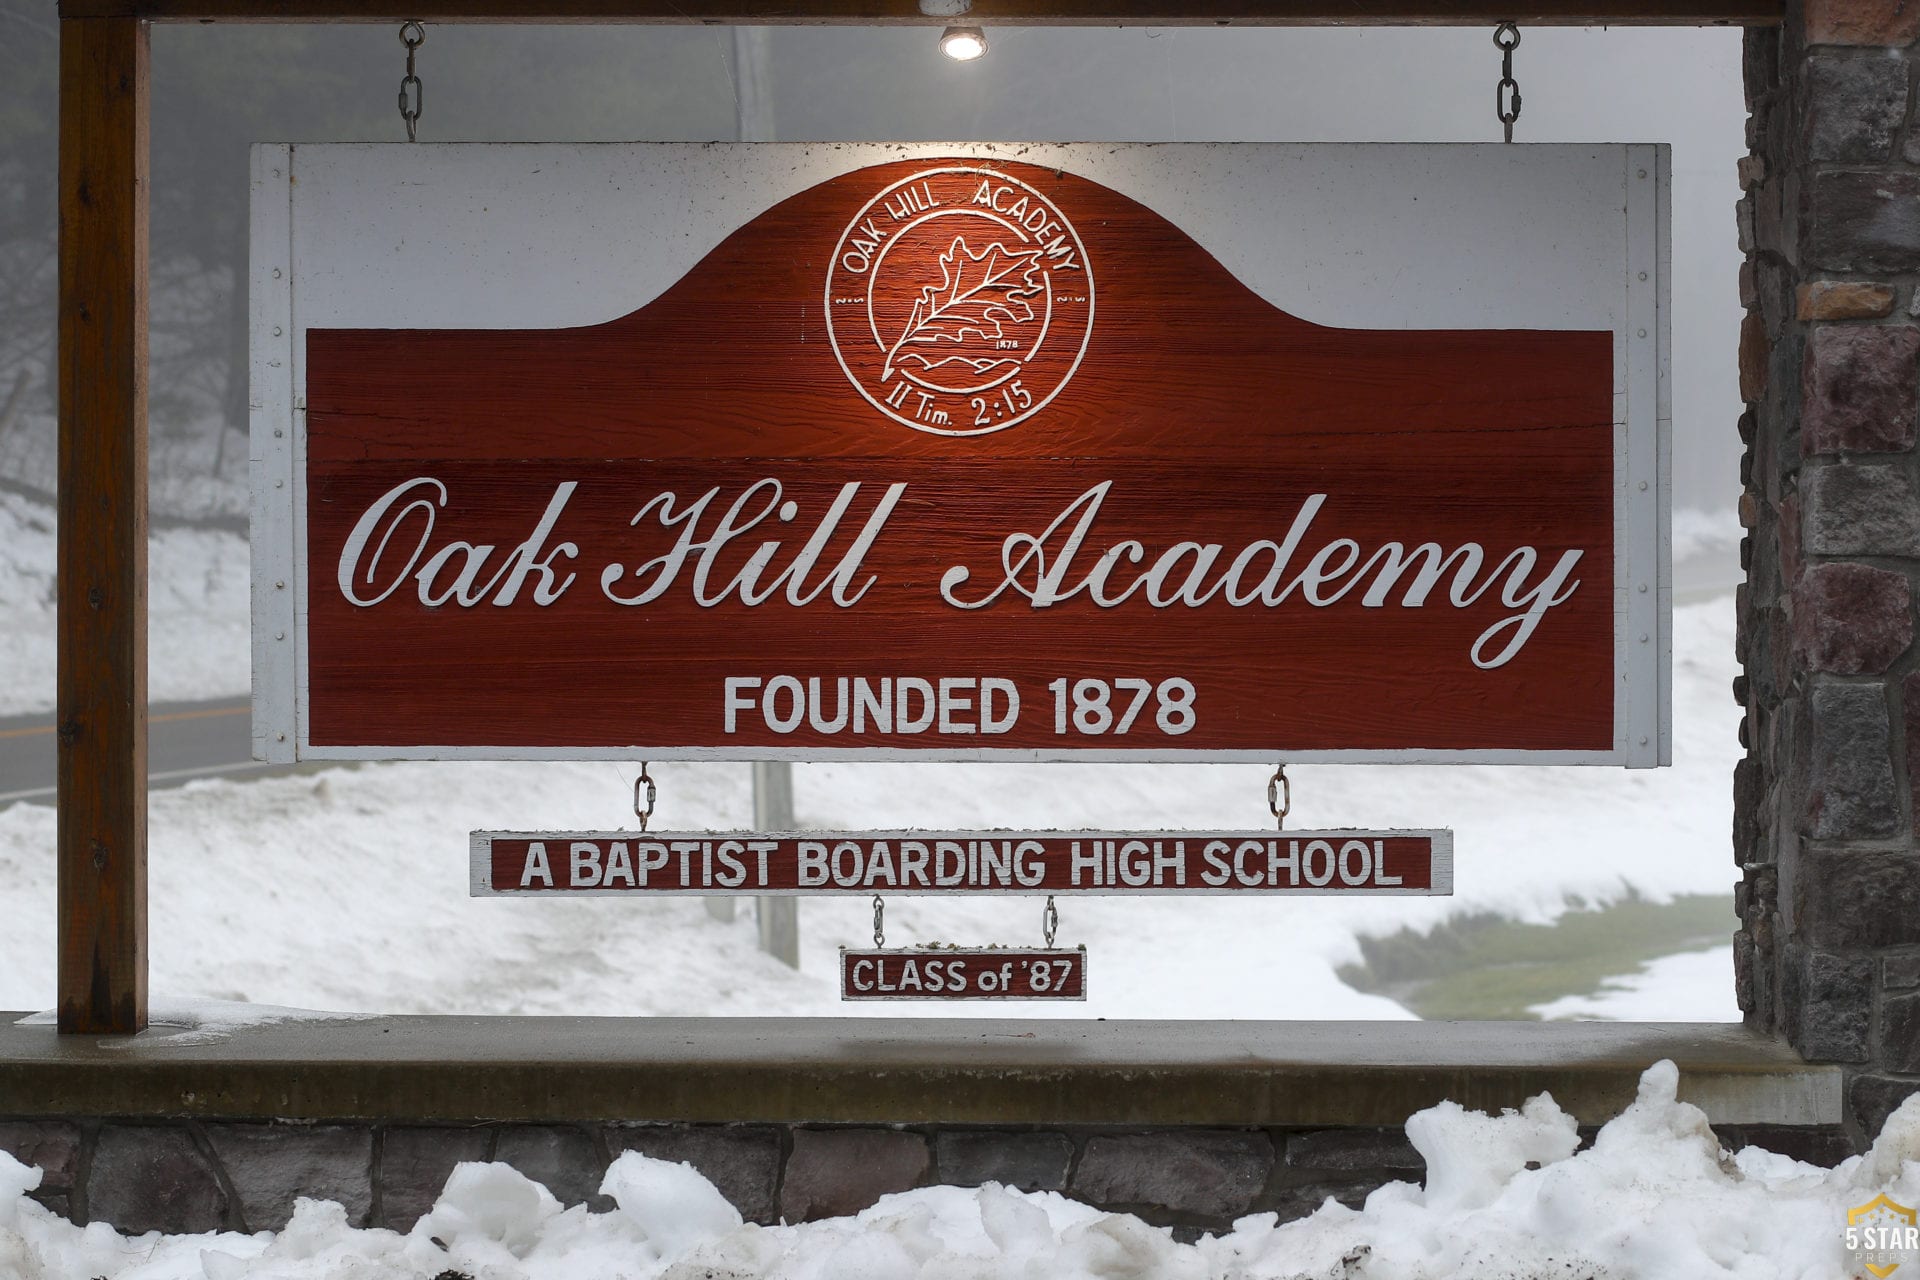 Oak Hill Academy is located in Mouth of Wilson, Va., an isolated town in a heavily wooded and mountainous region. (Photo: Danny Parker).